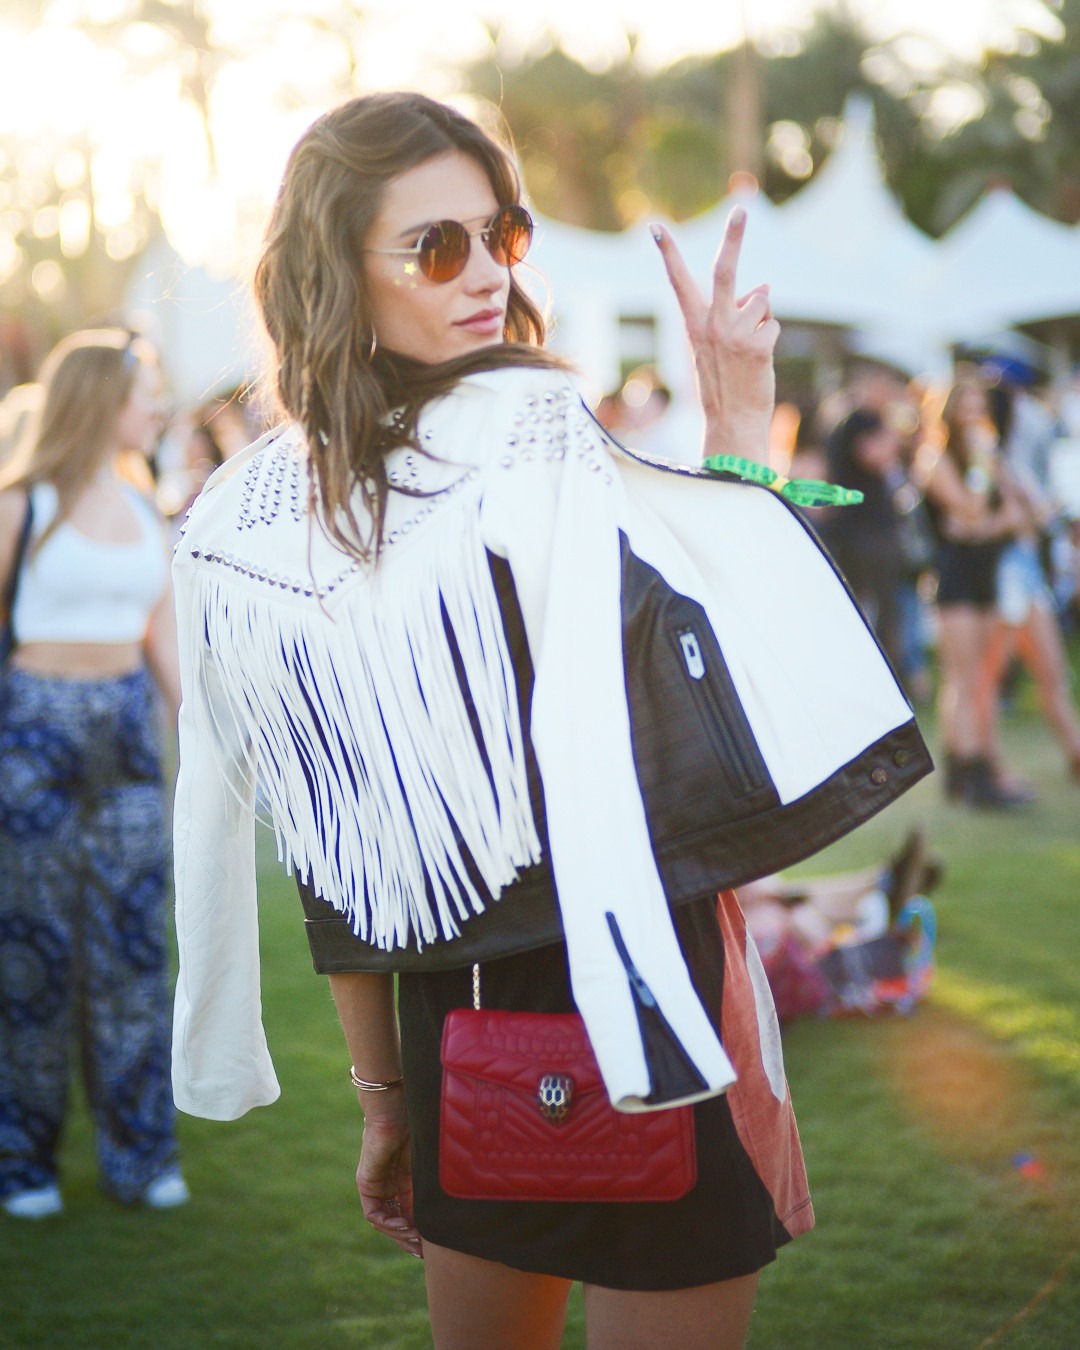 11 Super-Extra Beauty Products That Are Made for Coachella